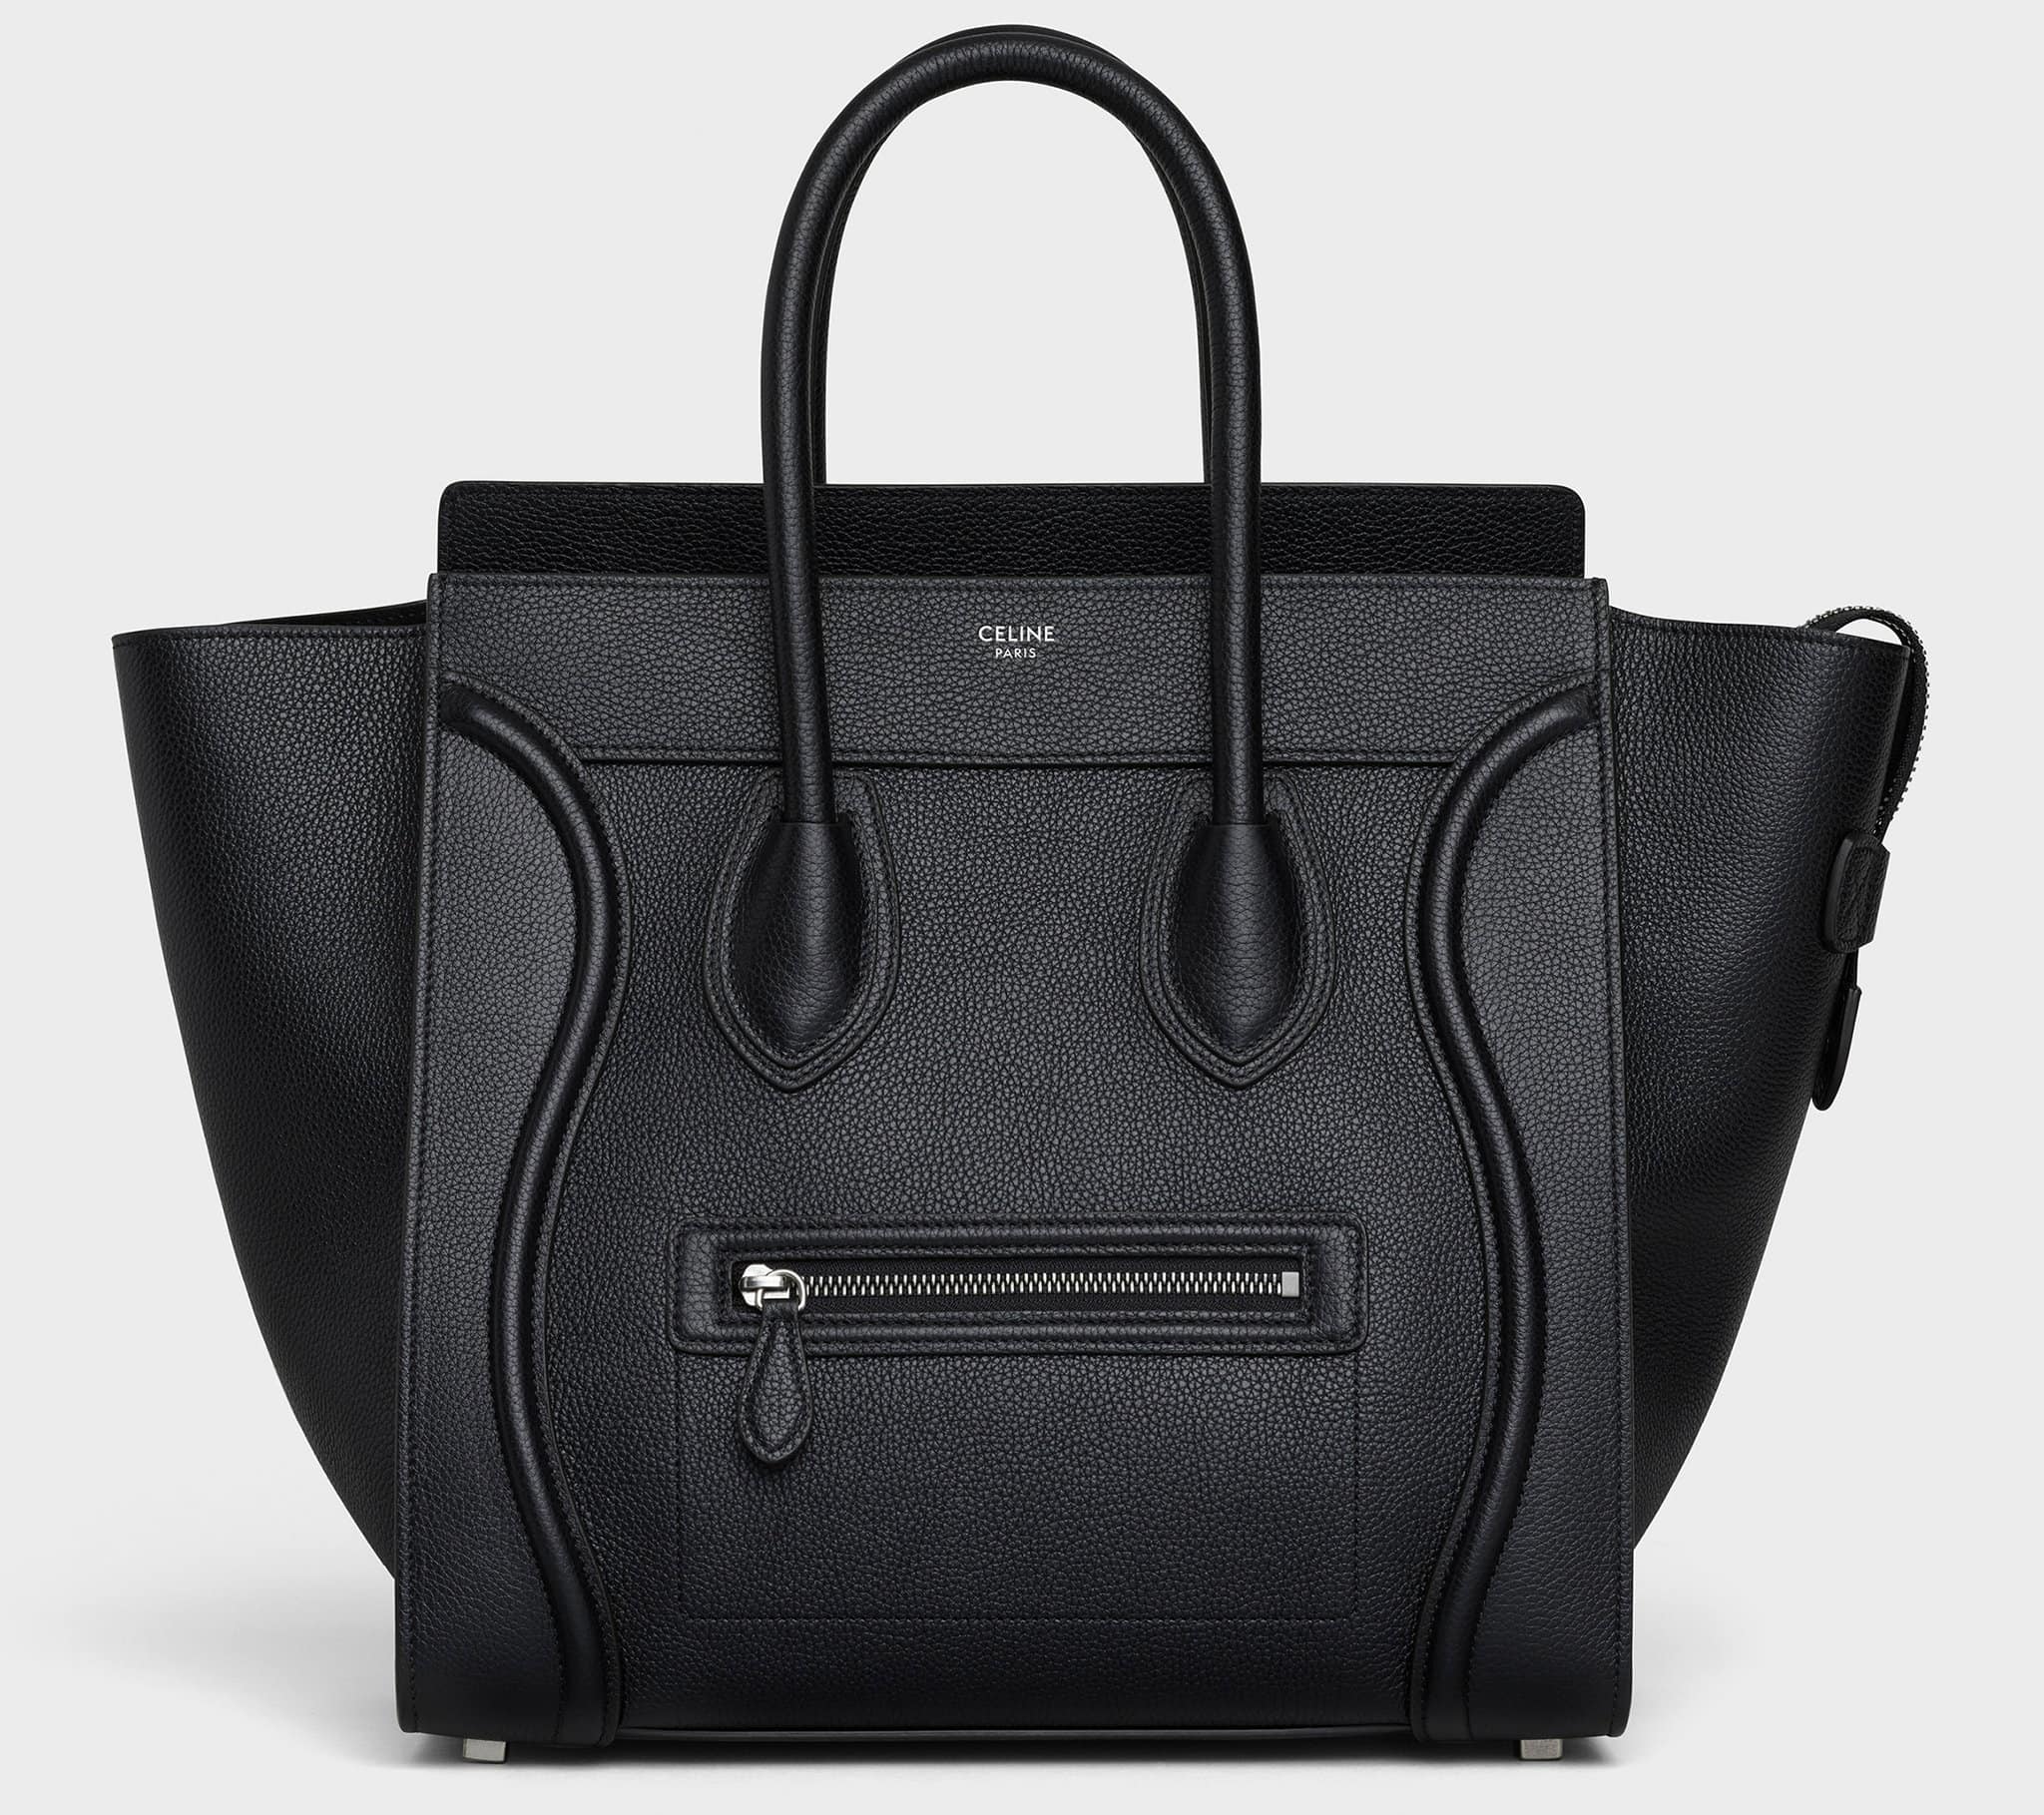 A celebrity-favorite, this popular Celine Luggage bag is crafted from drummed calfskin leather and features leather handles and a front zipped pocket